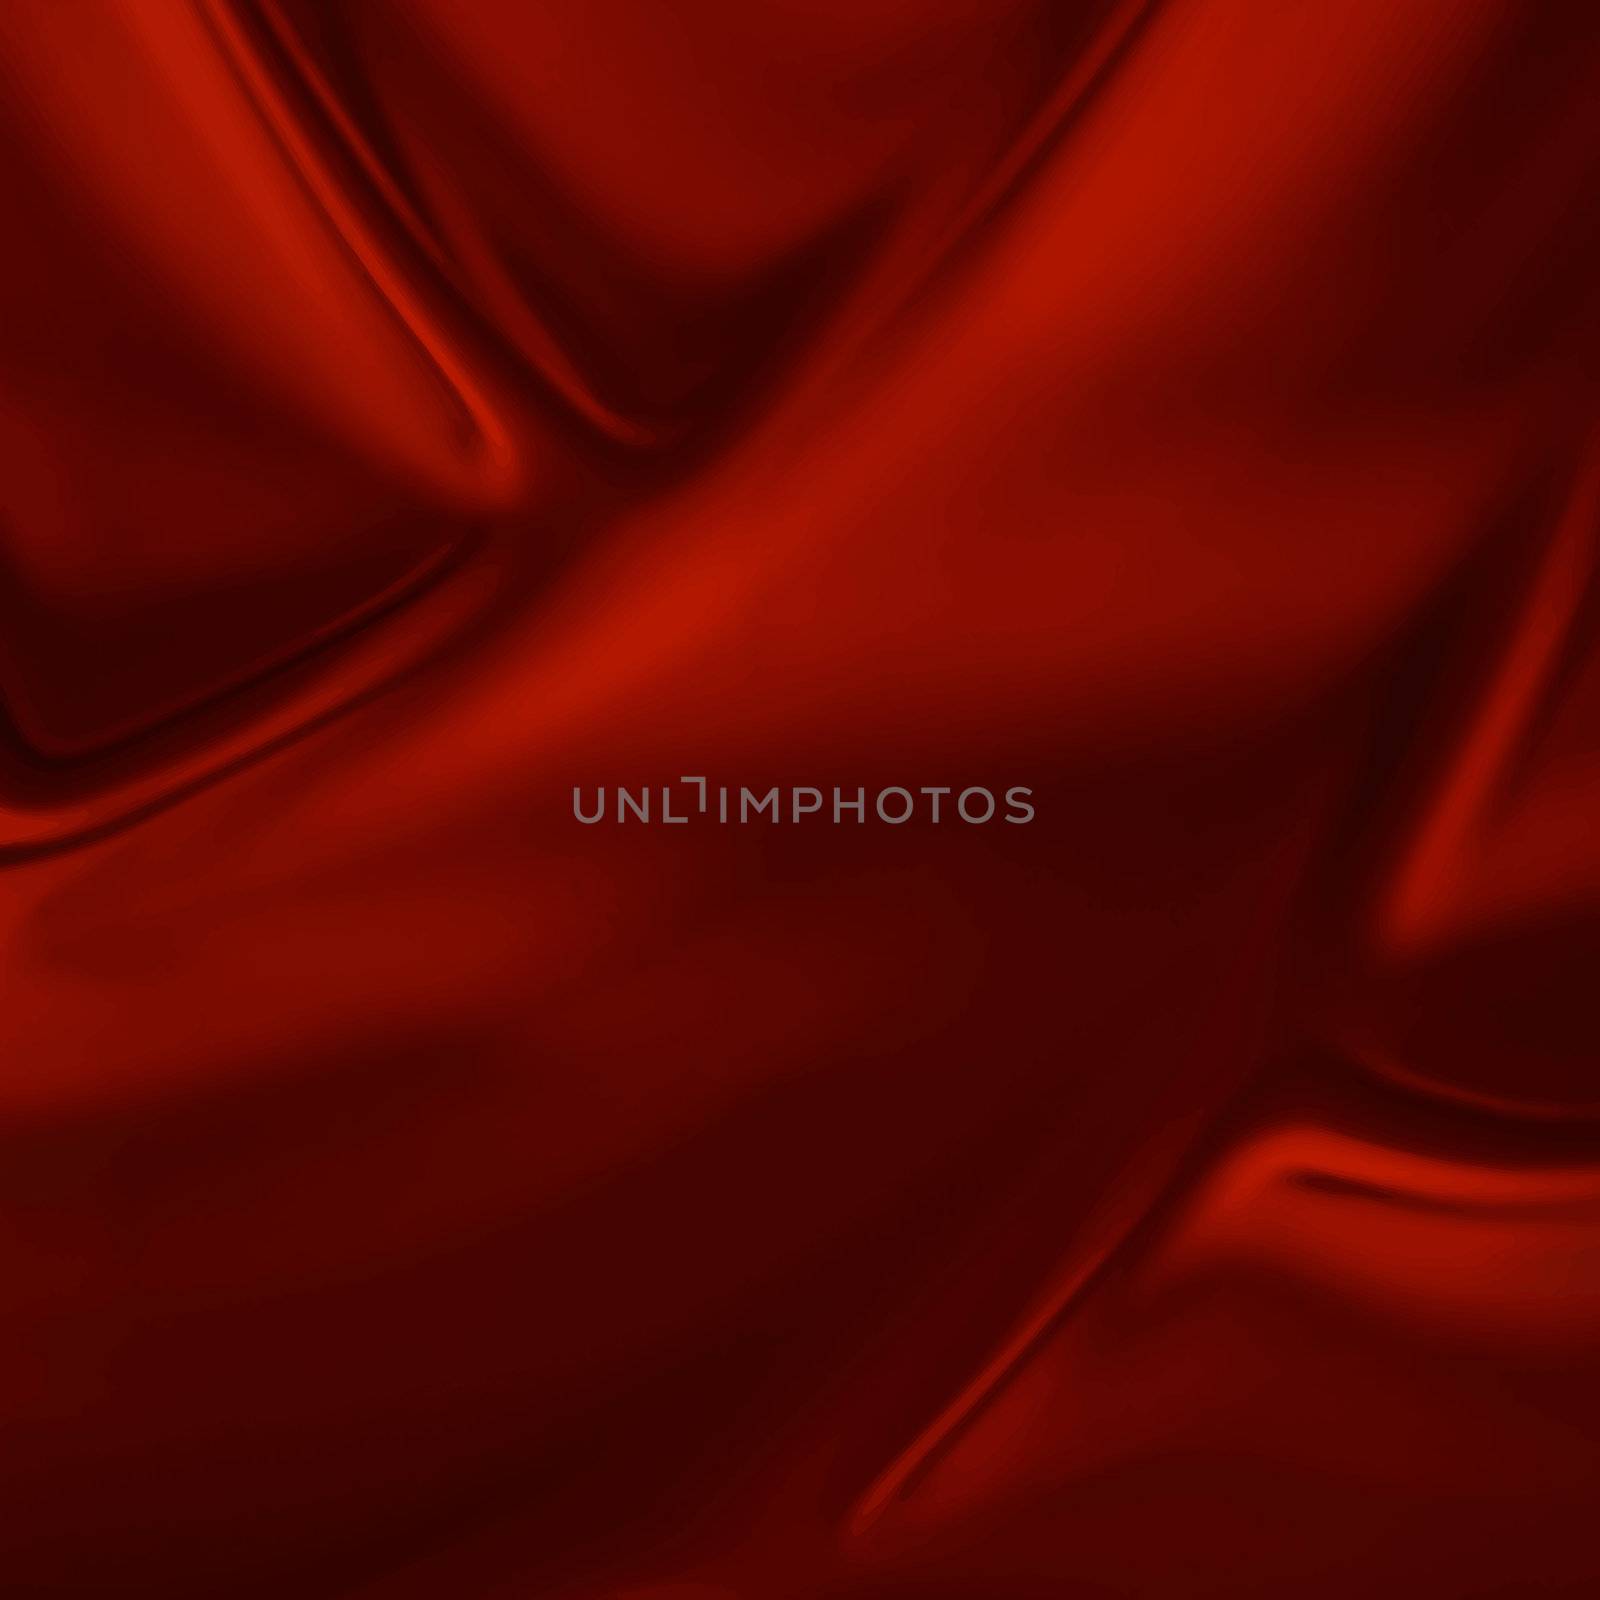 new royalty free image with red fabric can use like vintage background